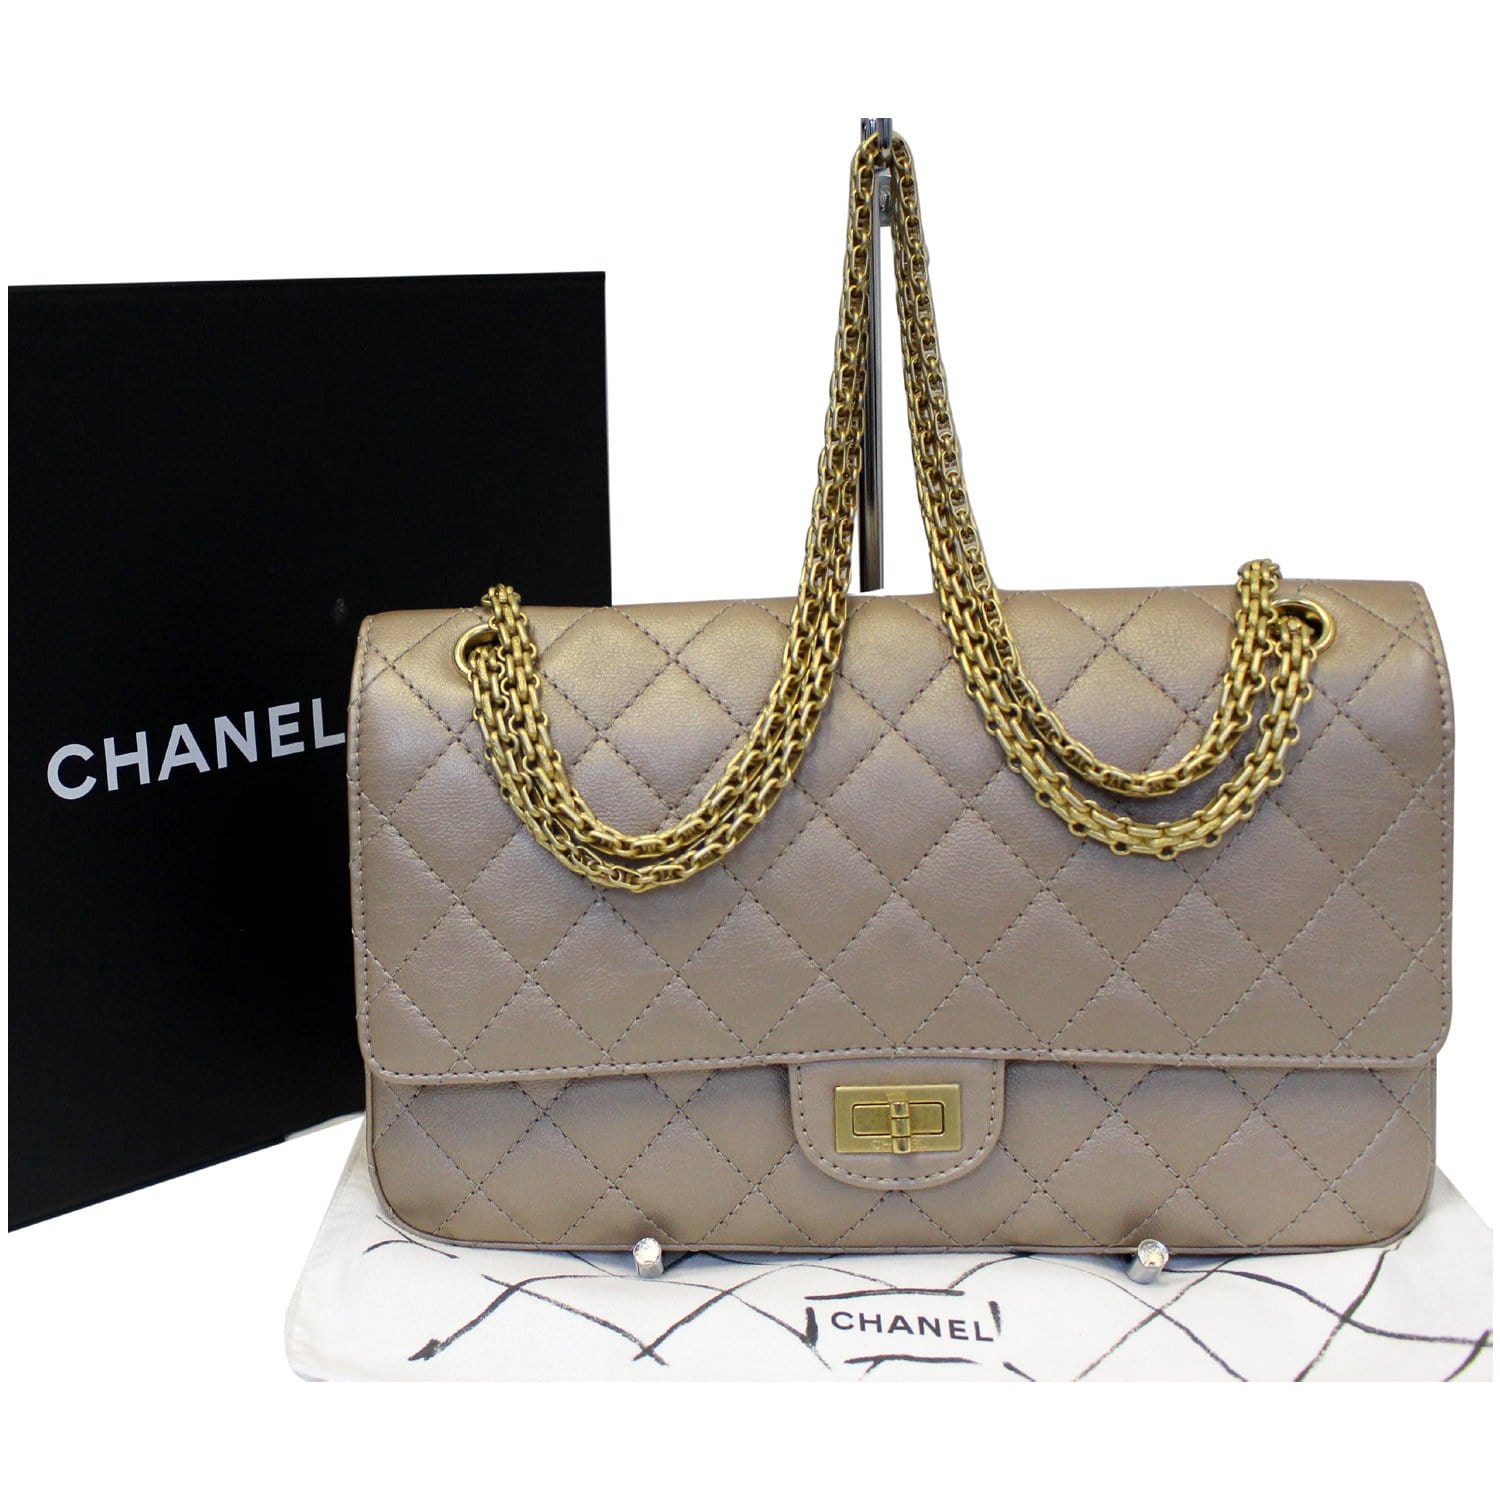 Chanel Beige Quilted Caviar Nubuck Leather Reissue 255 Classic 226 Fl